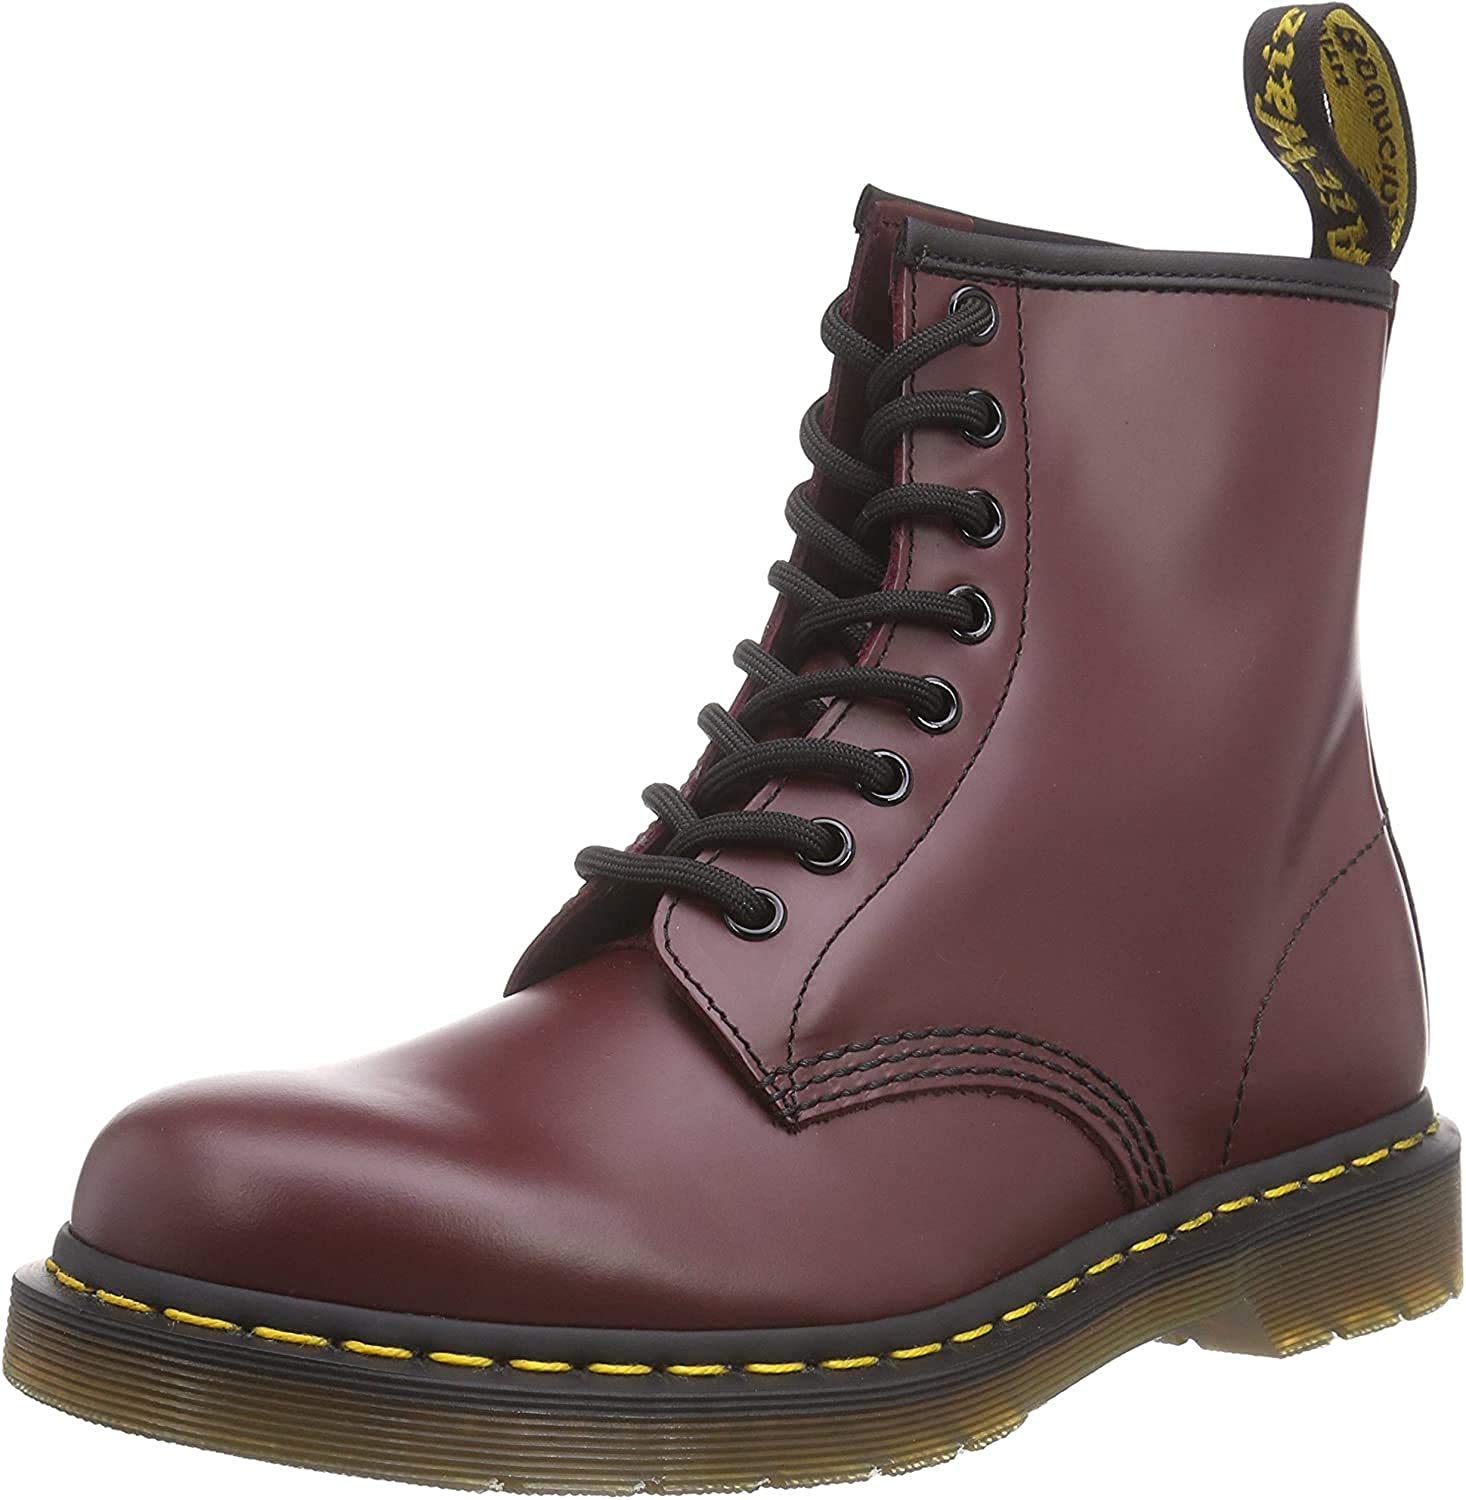 Dr. Martens 1460 Smooth, Unisex-Erwachsene Combat Boots, Rot (1460 Smooth 59 Last CHERRY RED), 40 EU